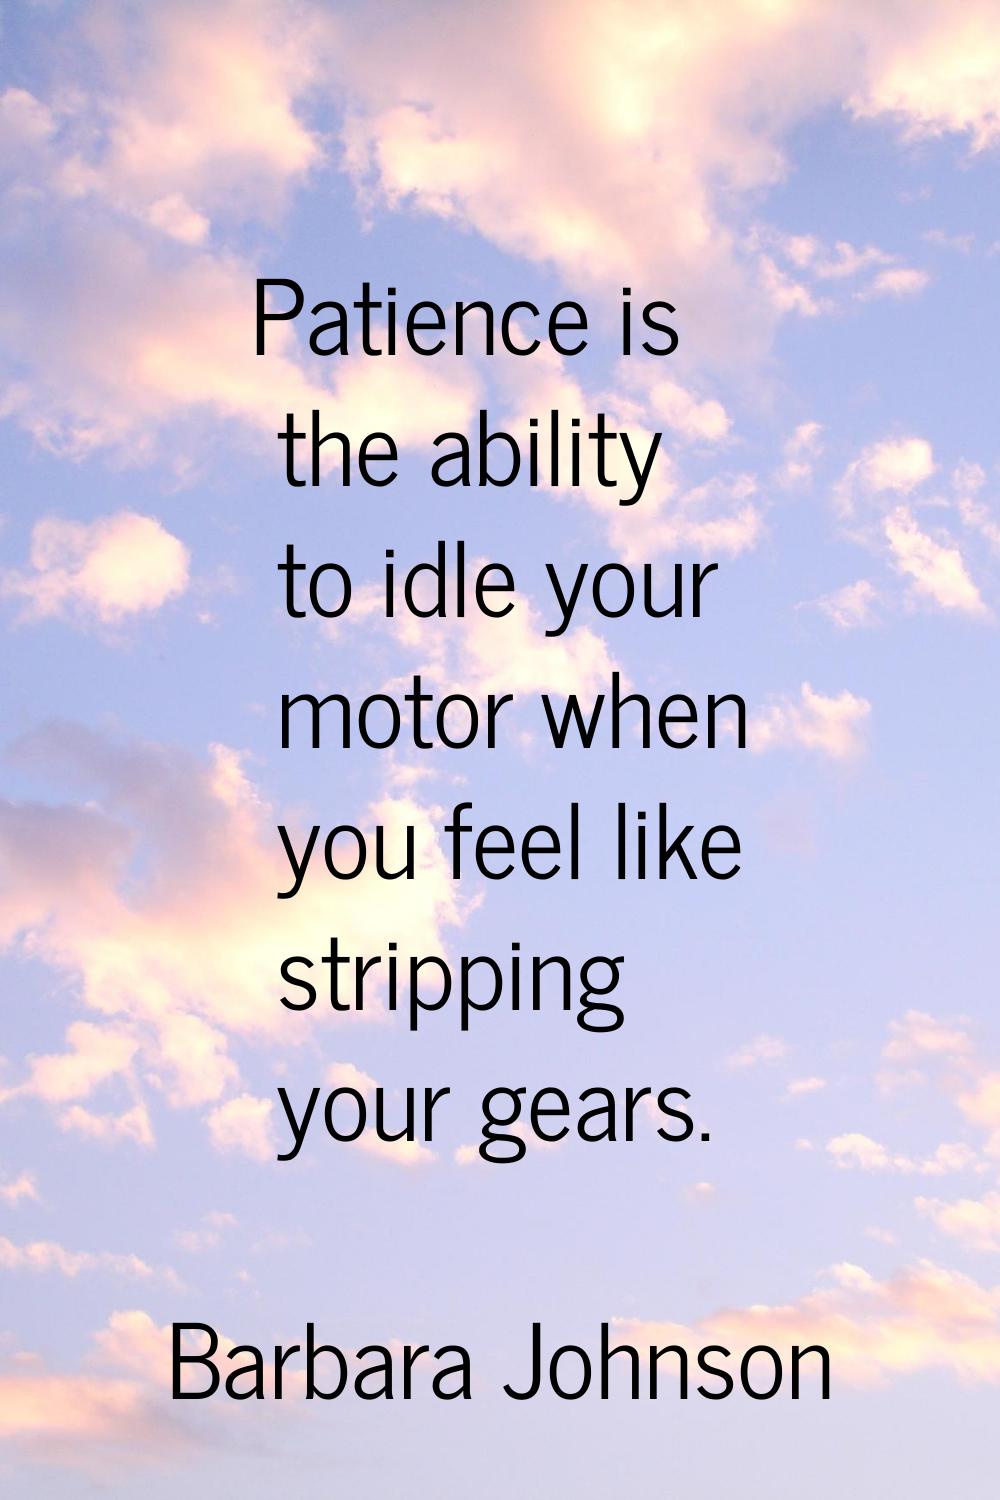 Patience is the ability to idle your motor when you feel like stripping your gears.